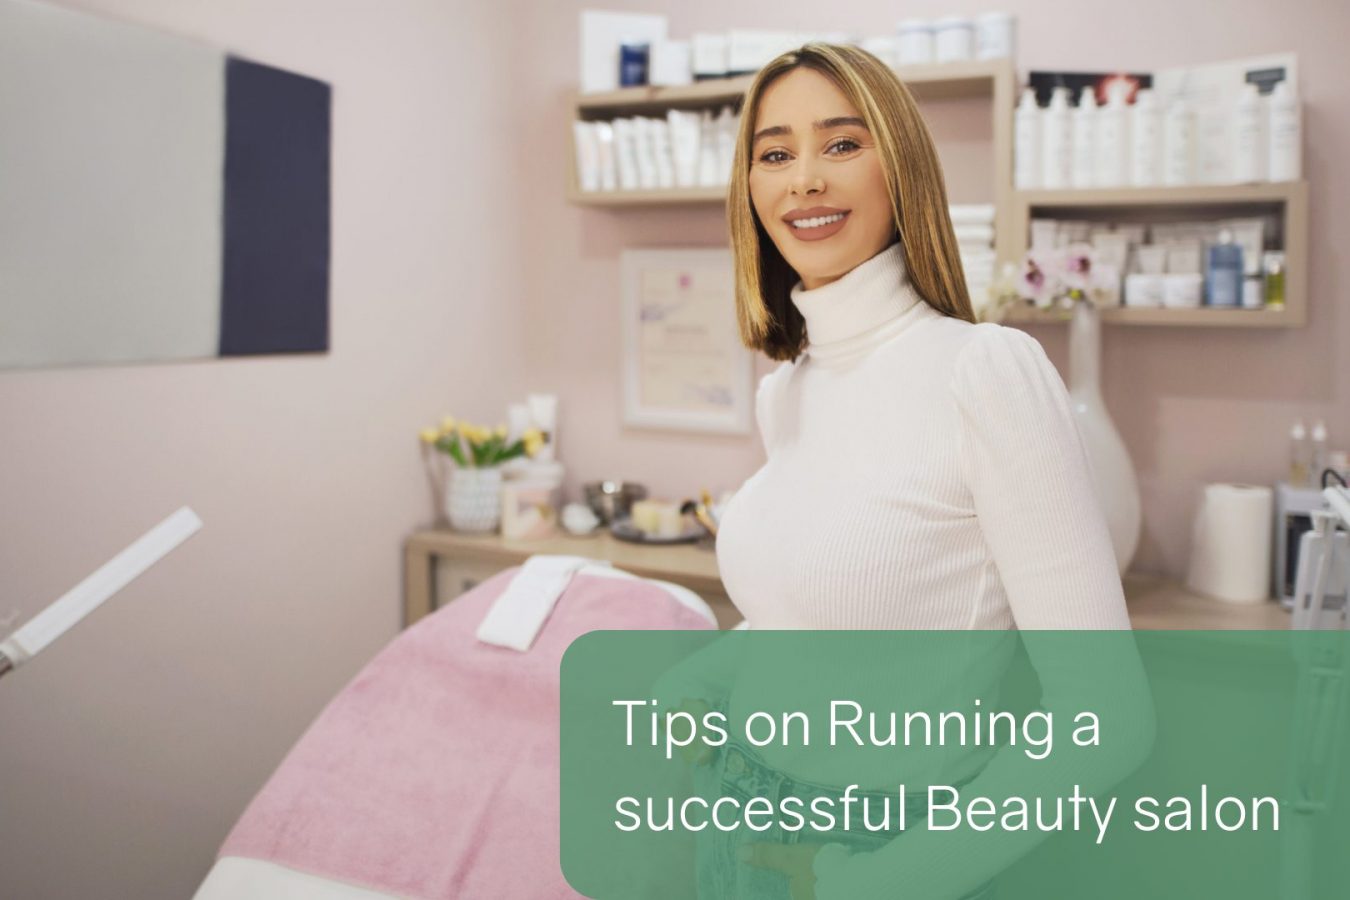 Tips on Running your own salon (3)